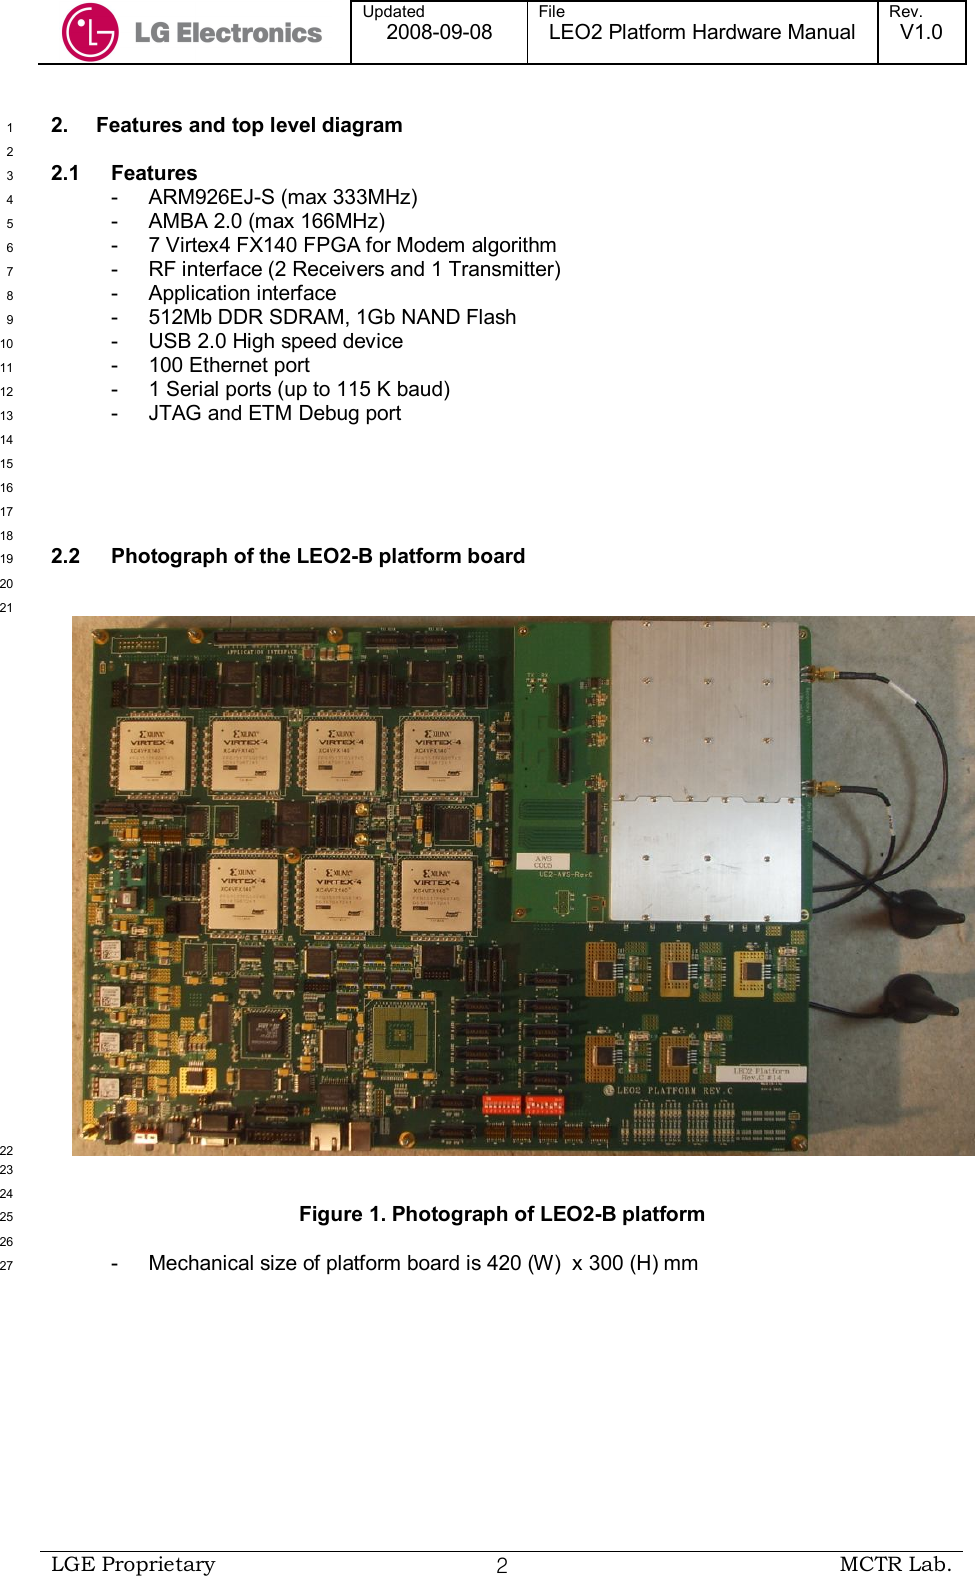  Updated 2008-09-08 File LEO2 Platform Hardware Manual Rev. V1.0   LGE Proprietary  ２ MCTR Lab.  2.  Features and top level diagram 1  2 2.1  Features 3 -  ARM926EJ-S (max 333MHz) 4 -  AMBA 2.0 (max 166MHz) 5 -  7 Virtex4 FX140 FPGA for Modem algorithm  6 -  RF interface (2 Receivers and 1 Transmitter) 7 -  Application interface 8 -  512Mb DDR SDRAM, 1Gb NAND Flash 9 -  USB 2.0 High speed device 10 -  100 Ethernet port 11 -  1 Serial ports (up to 115 K baud) 12 -  JTAG and ETM Debug port 13  14  15  16  17  18 2.2  Photograph of the LEO2-B platform board 19  20  21  22  23  24 Figure 1. Photograph of LEO2-B platform 25  26 -  Mechanical size of platform board is 420 (W)  x 300 (H) mm 27 